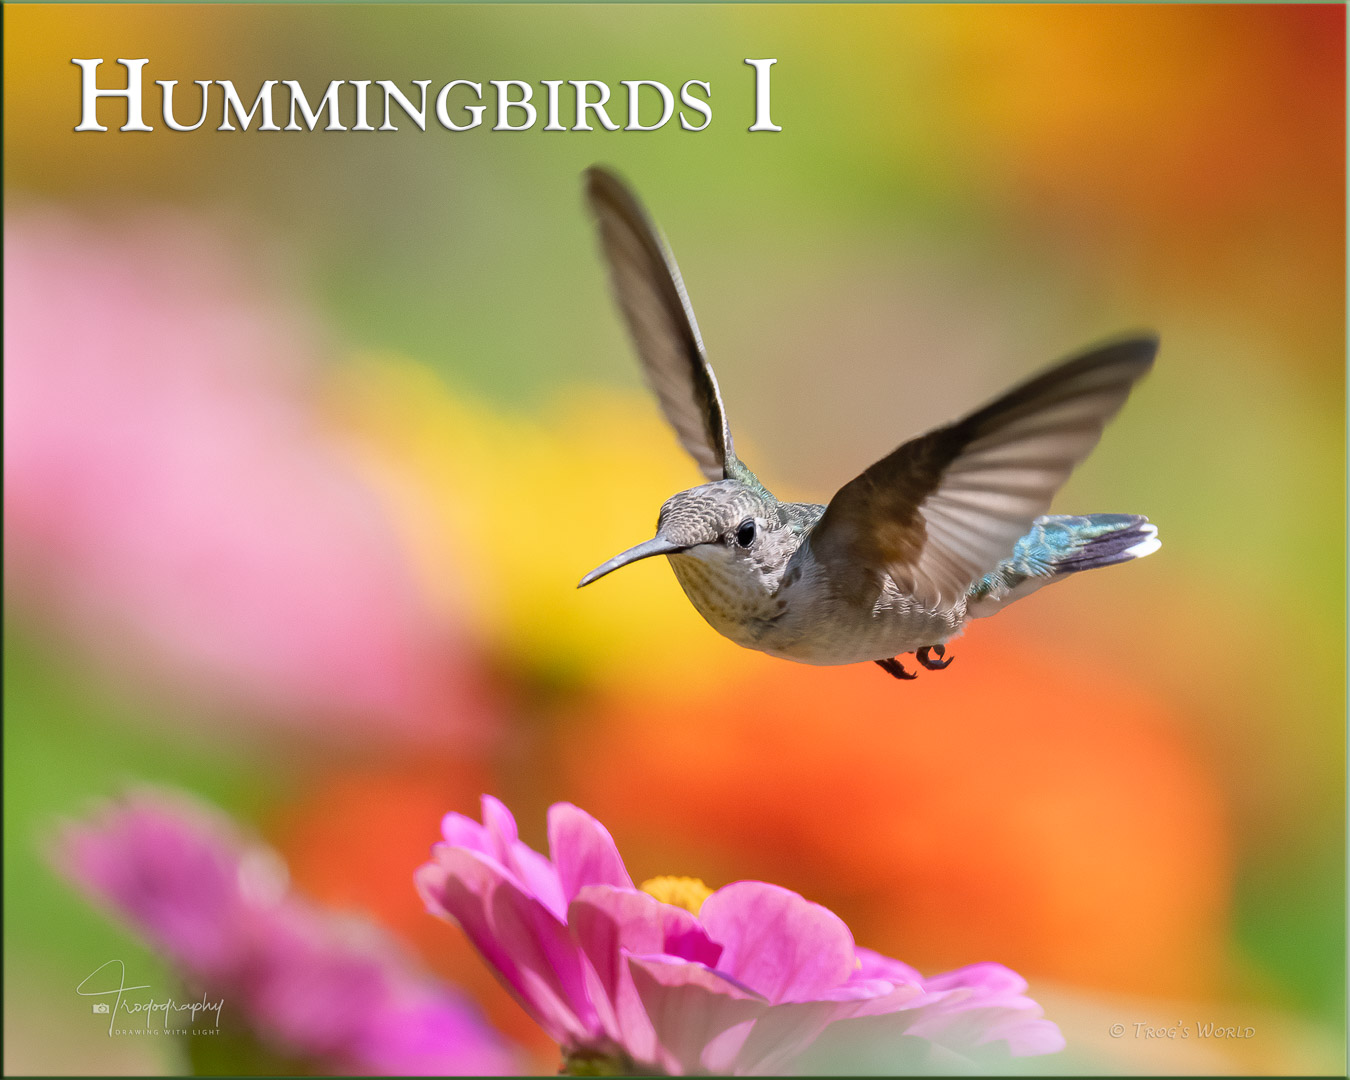 Hummingbird hovers over the flowers